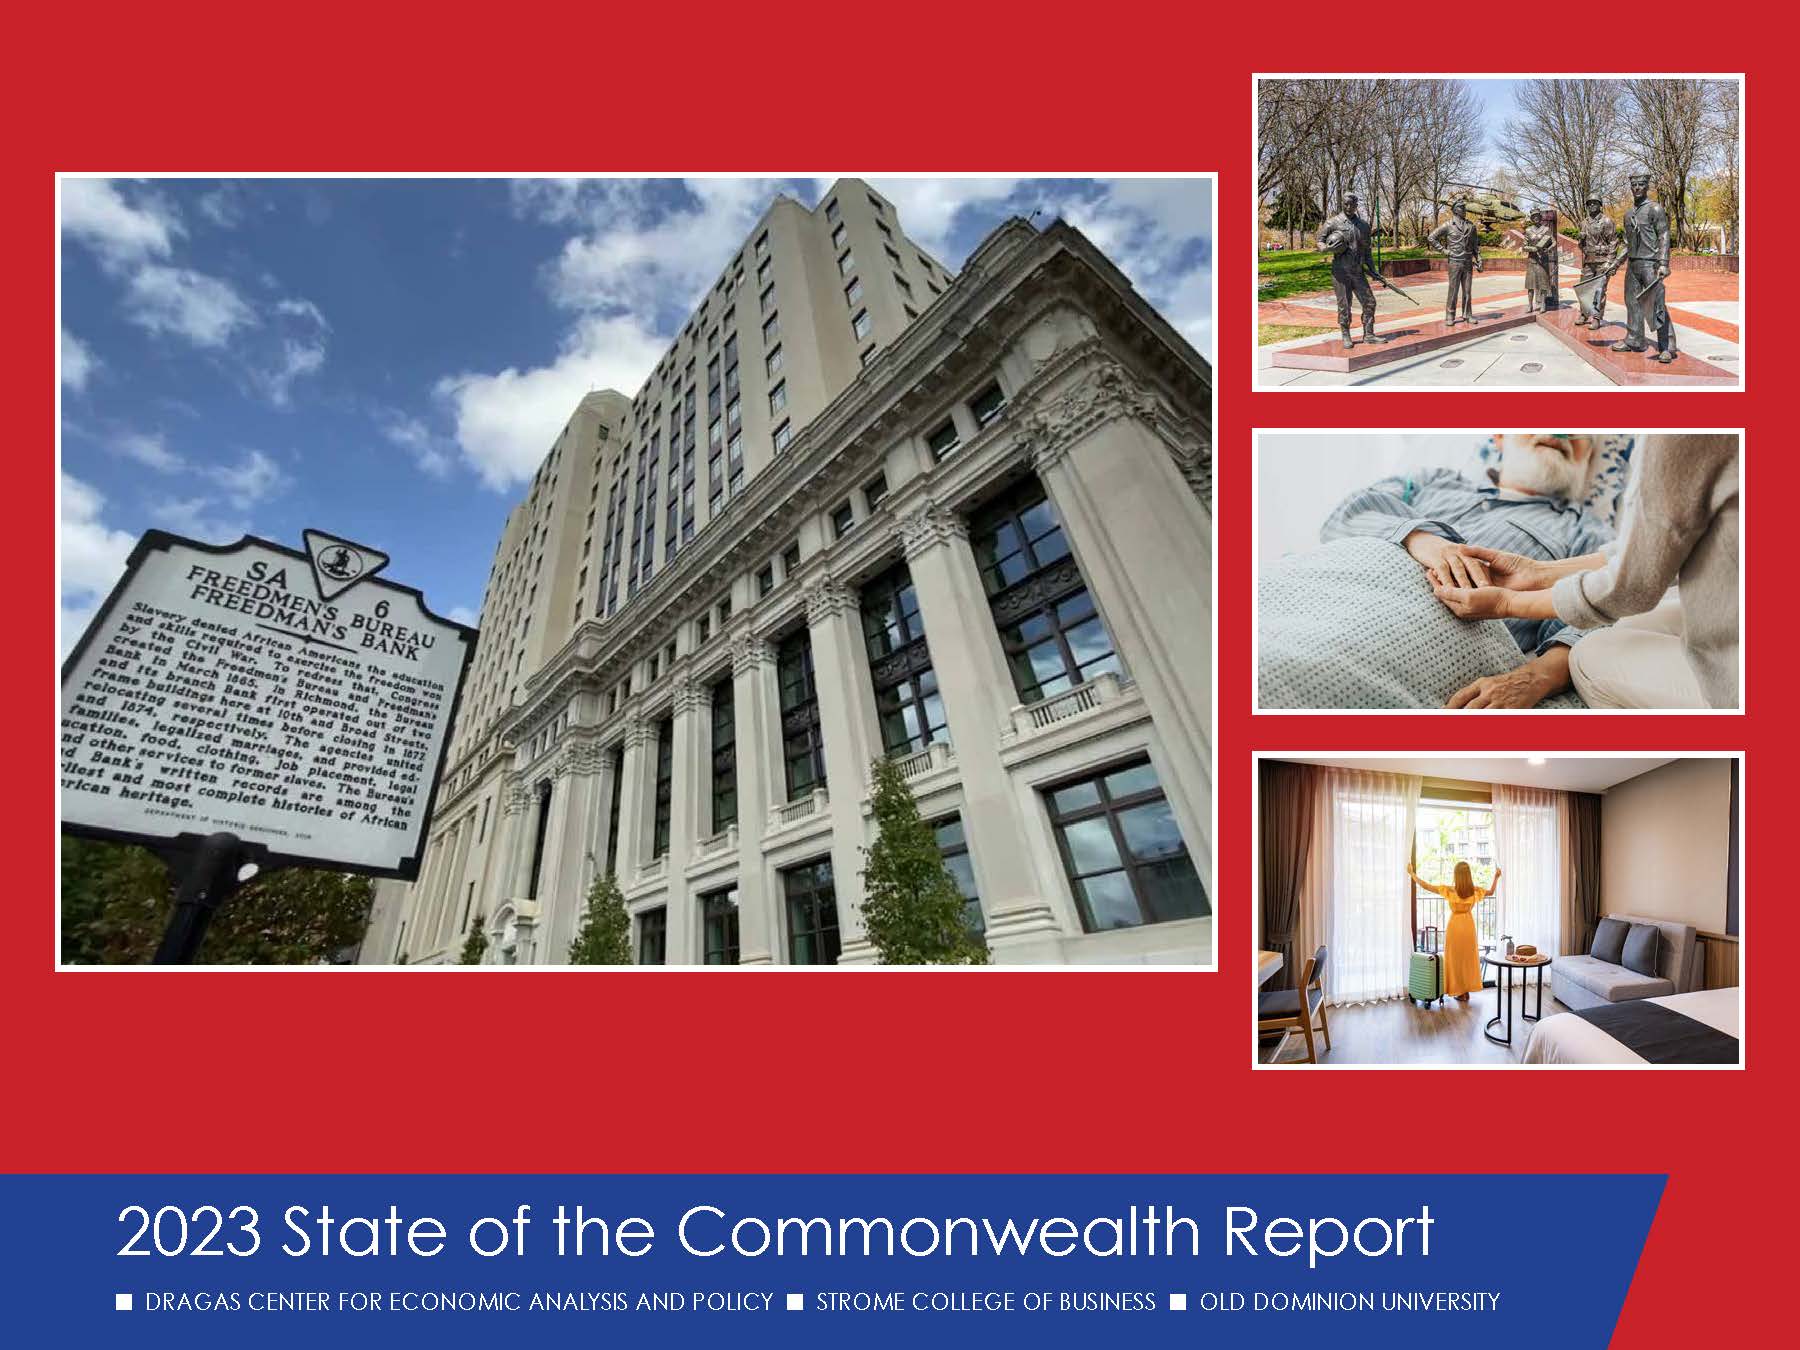 State of the Commonwealth Reports